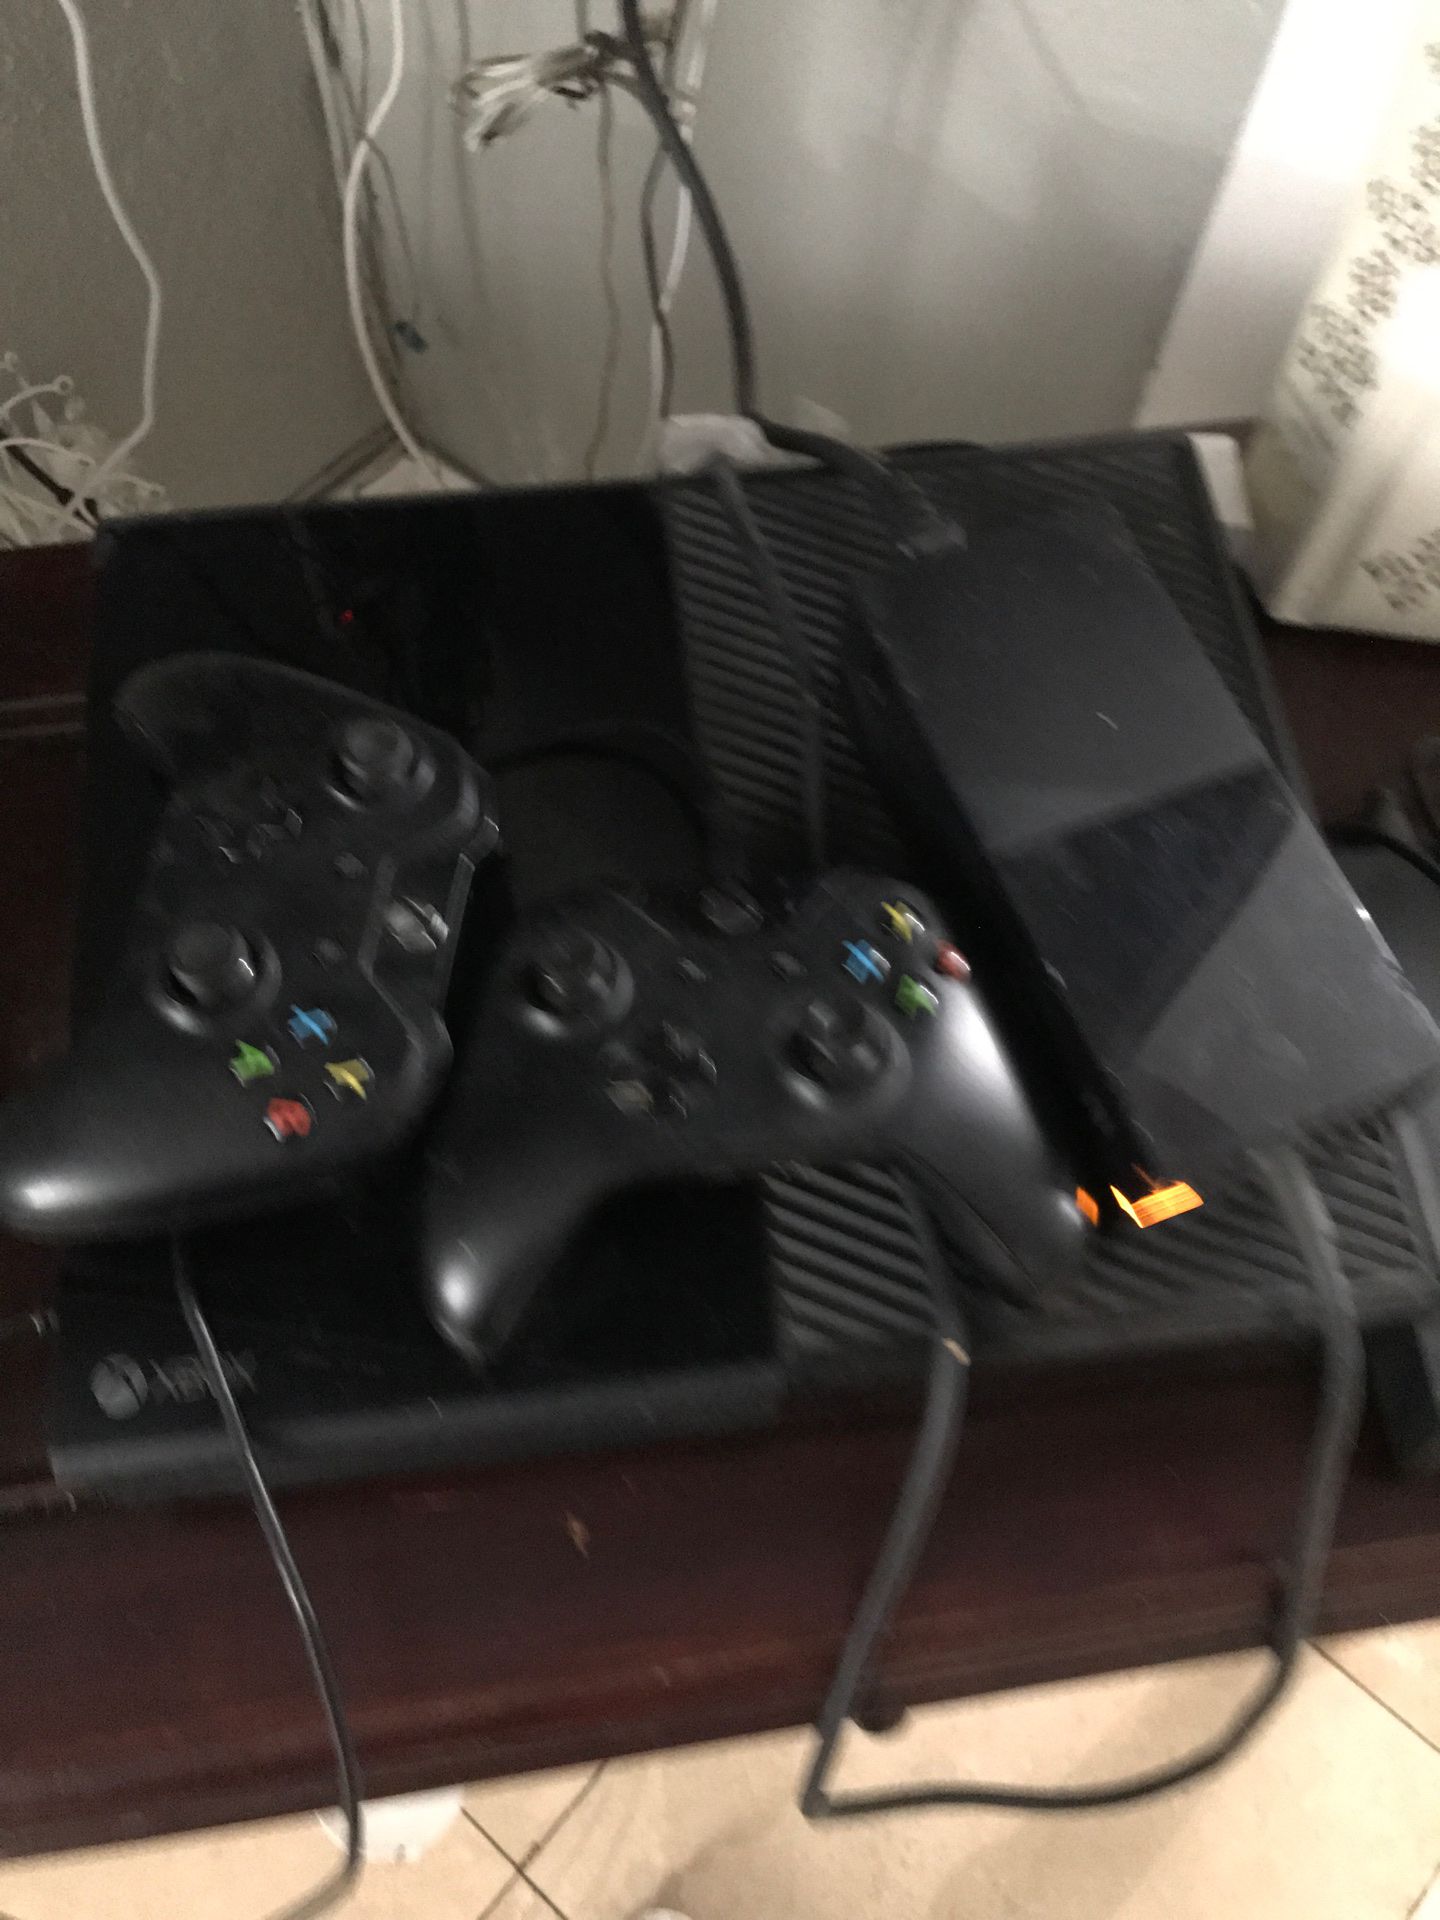 Xbox one two controllers a hard drive